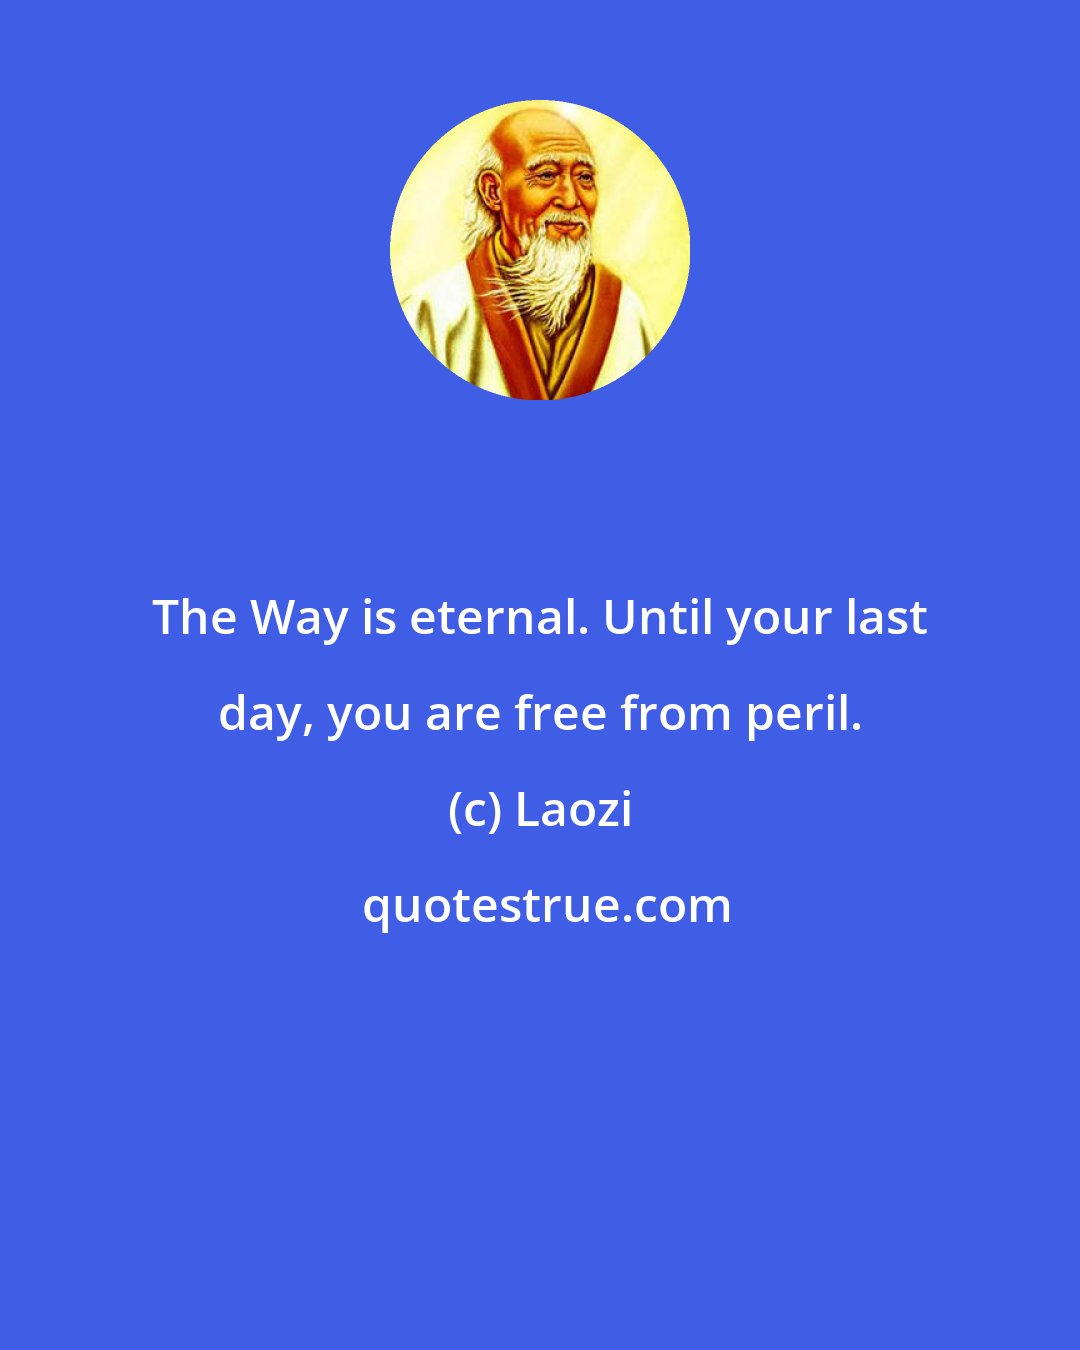 Laozi: The Way is eternal. Until your last day, you are free from peril.